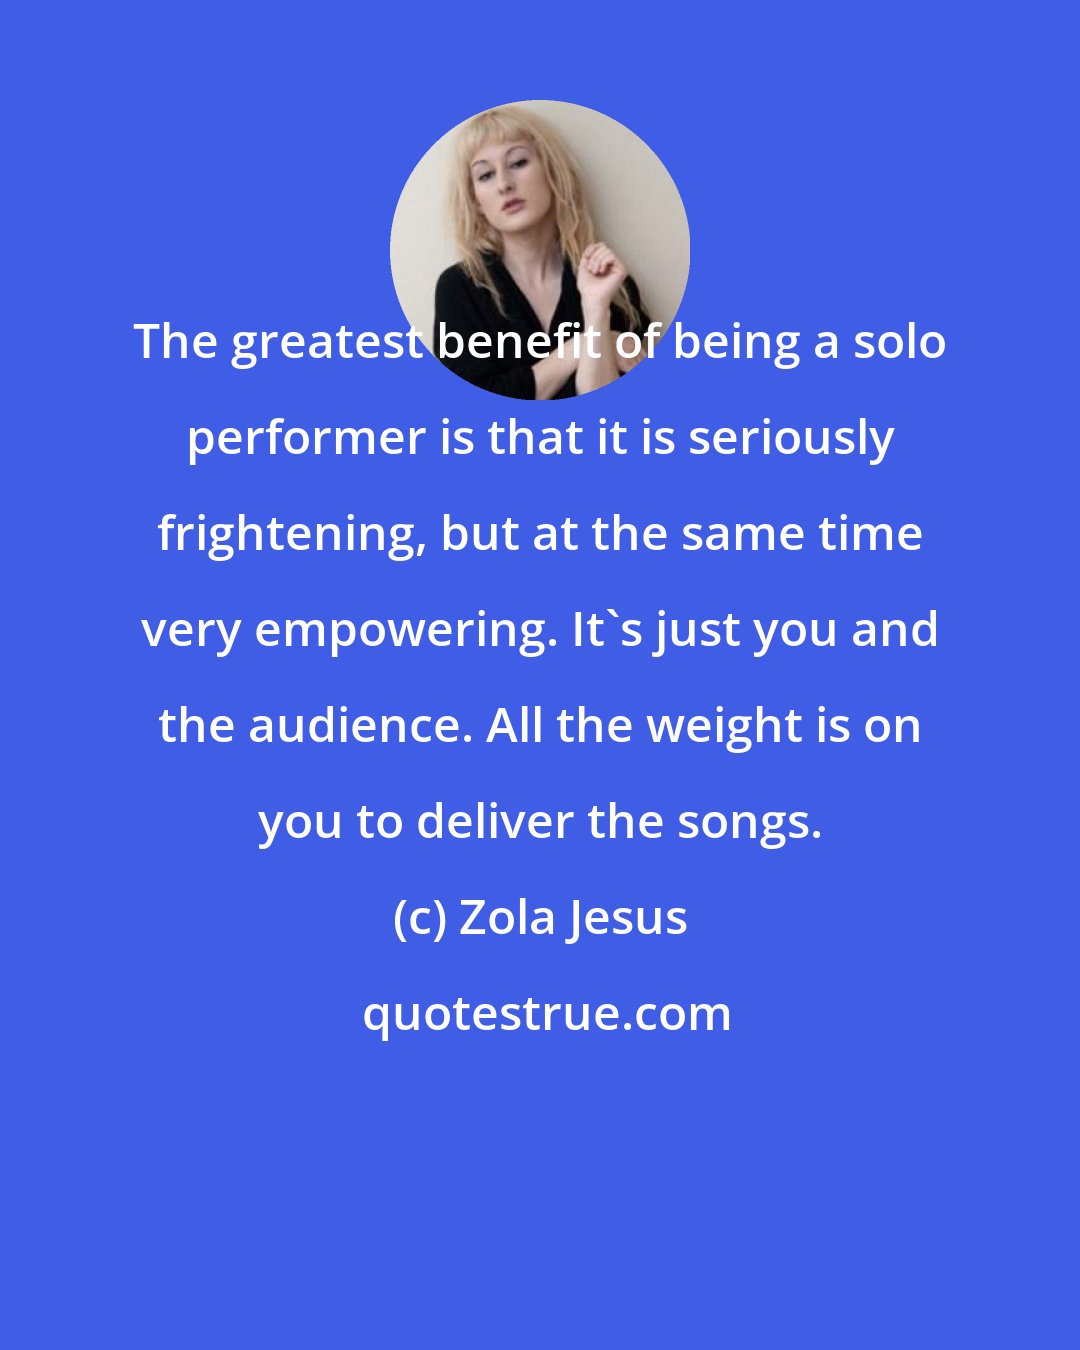 Zola Jesus: The greatest benefit of being a solo performer is that it is seriously frightening, but at the same time very empowering. It's just you and the audience. All the weight is on you to deliver the songs.